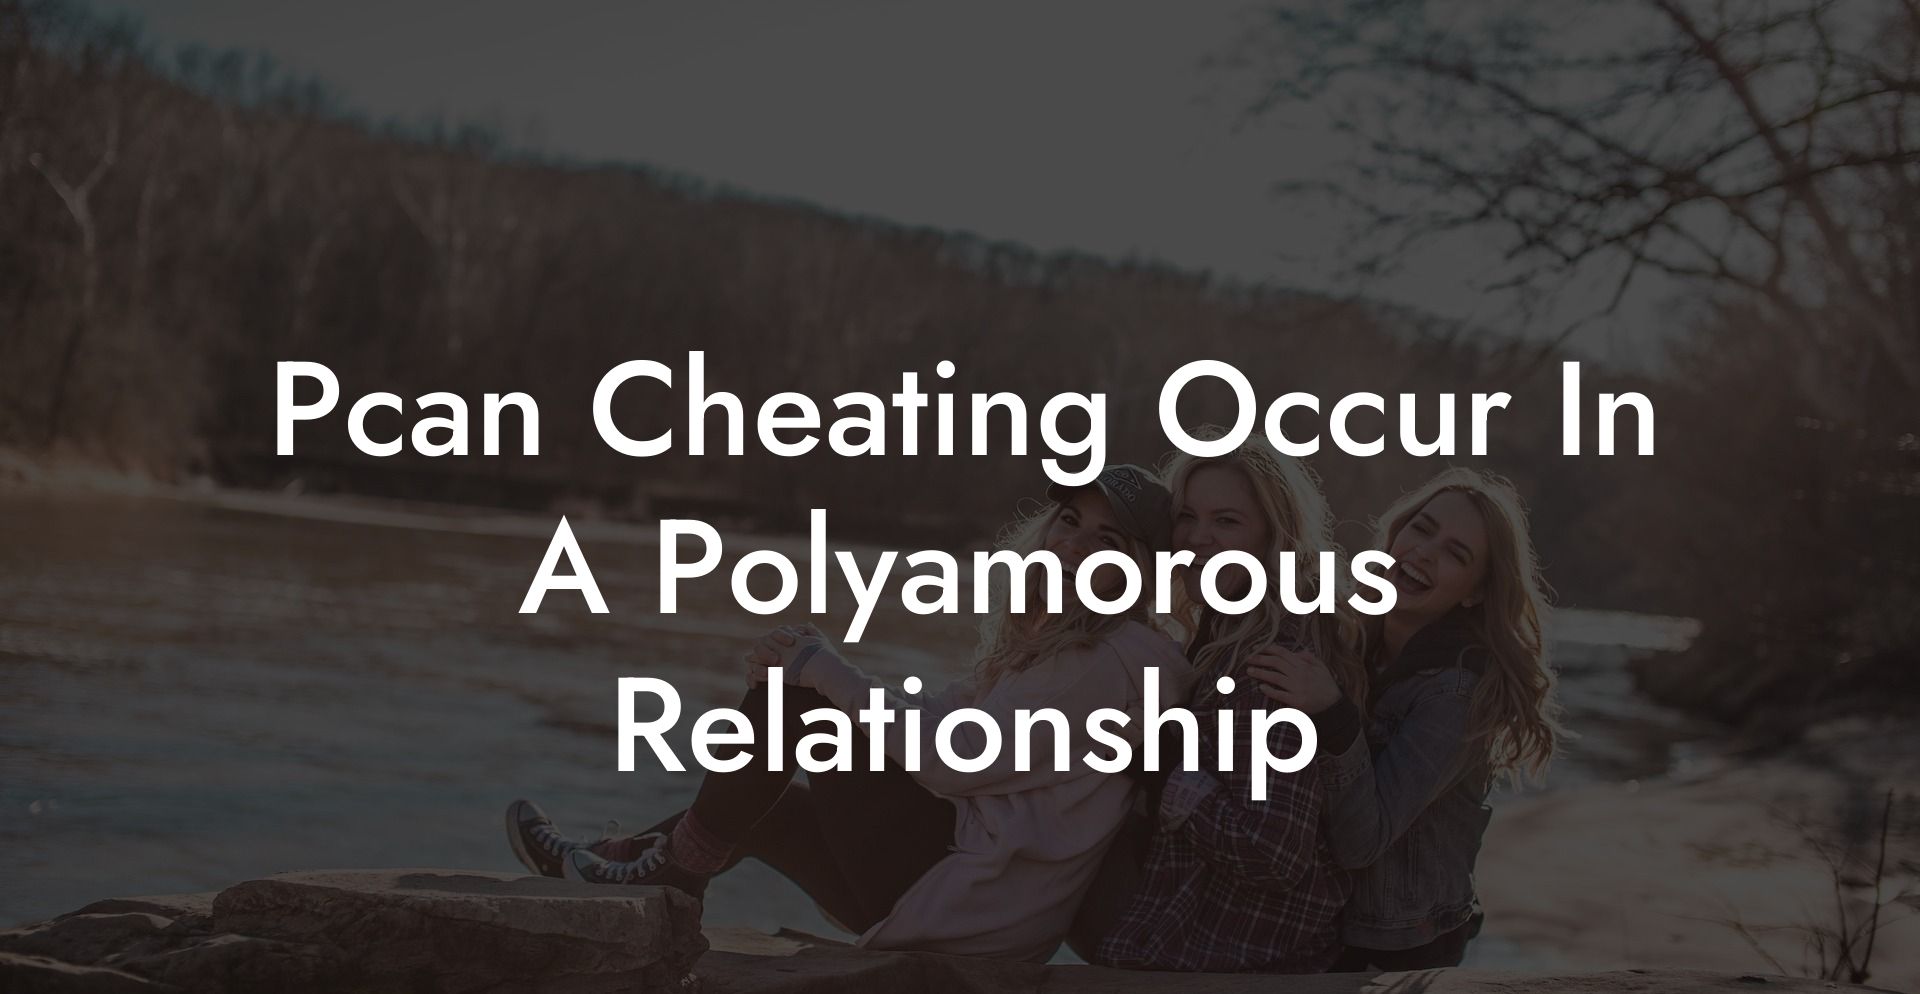 Pcan Cheating Occur In A Polyamorous Relationship